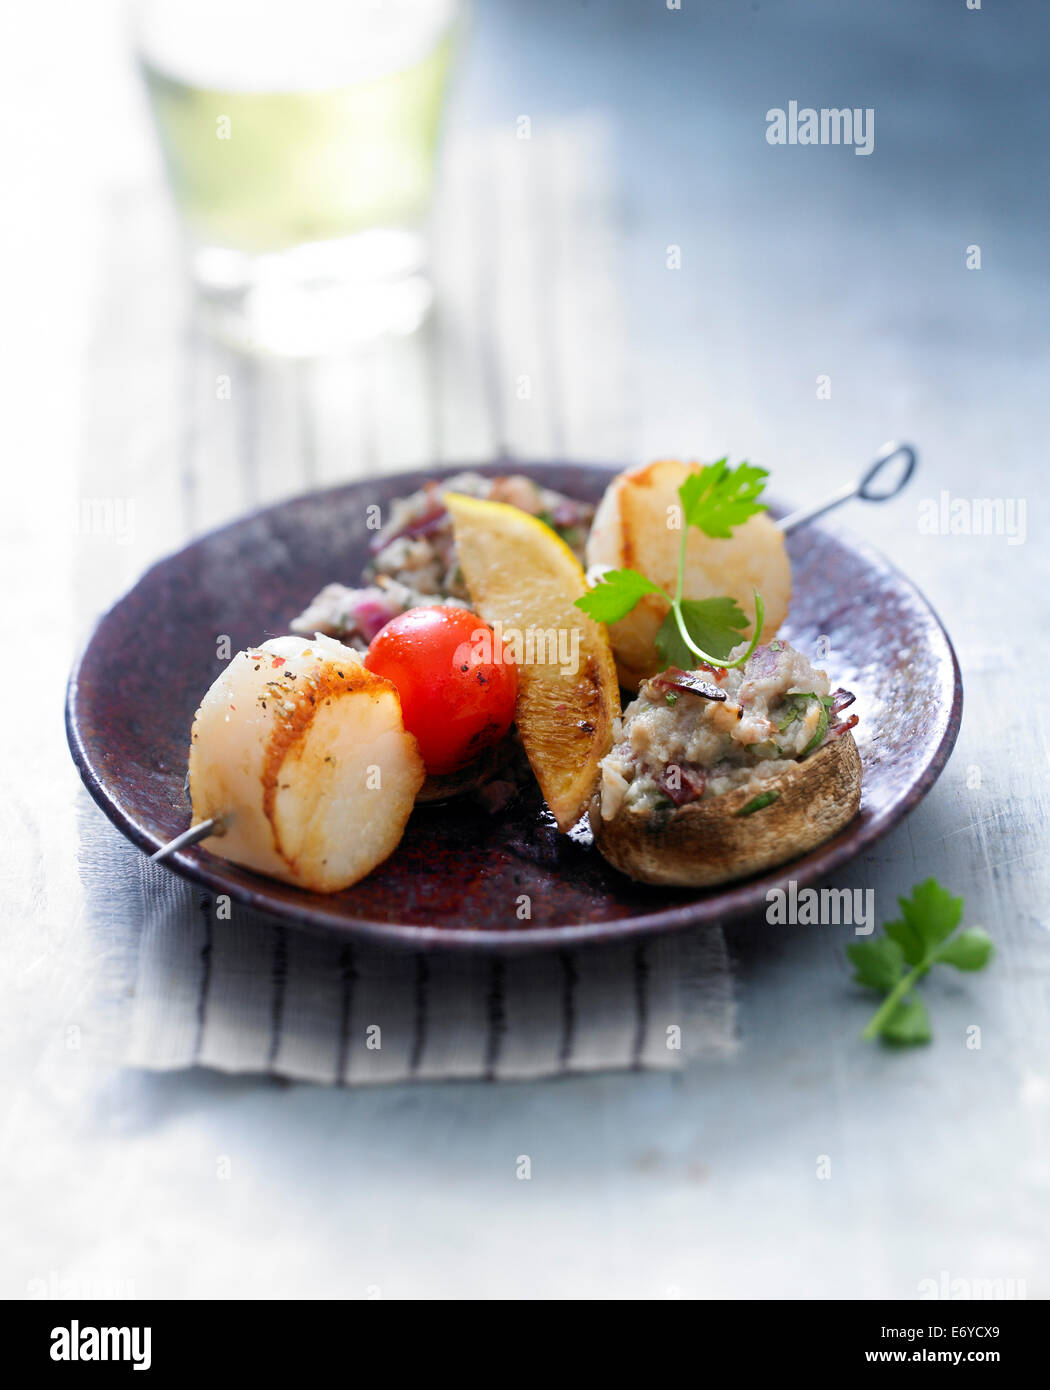 Scallop brochette with mushrooms stuffed with smoked duck magret Stock Photo